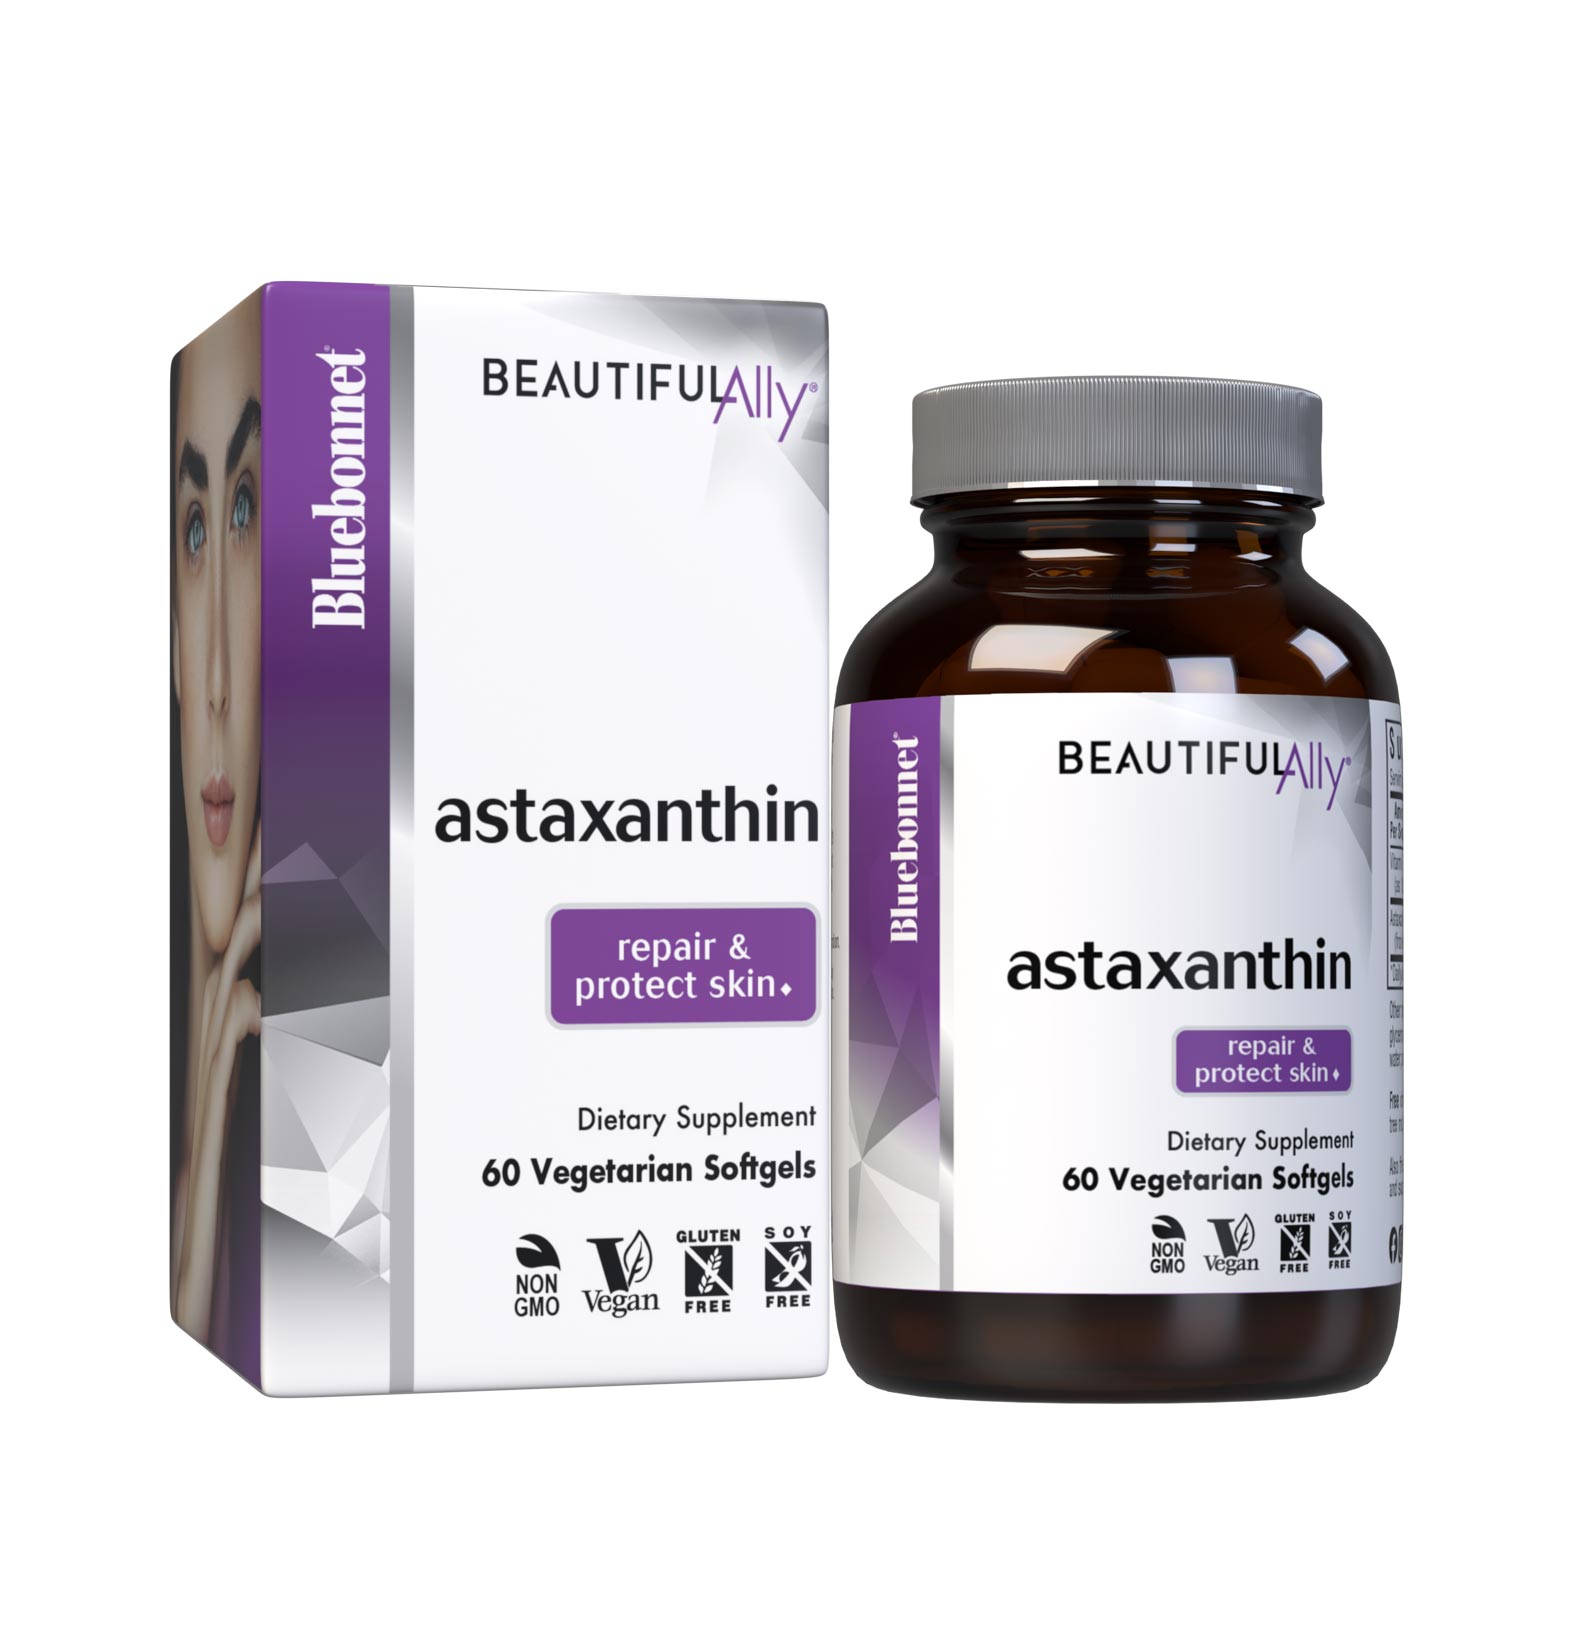 Bluebonnet’s Beautiful Ally Astaxanthin 60 Vegetarian Softgels are specially formulated to help repair and protect the skin from UV-induced oxidative stress that contributes to skin damage and aging with a vegan-based astaxanthin sustainably-sourced from marine algae. With box. #size_60 count